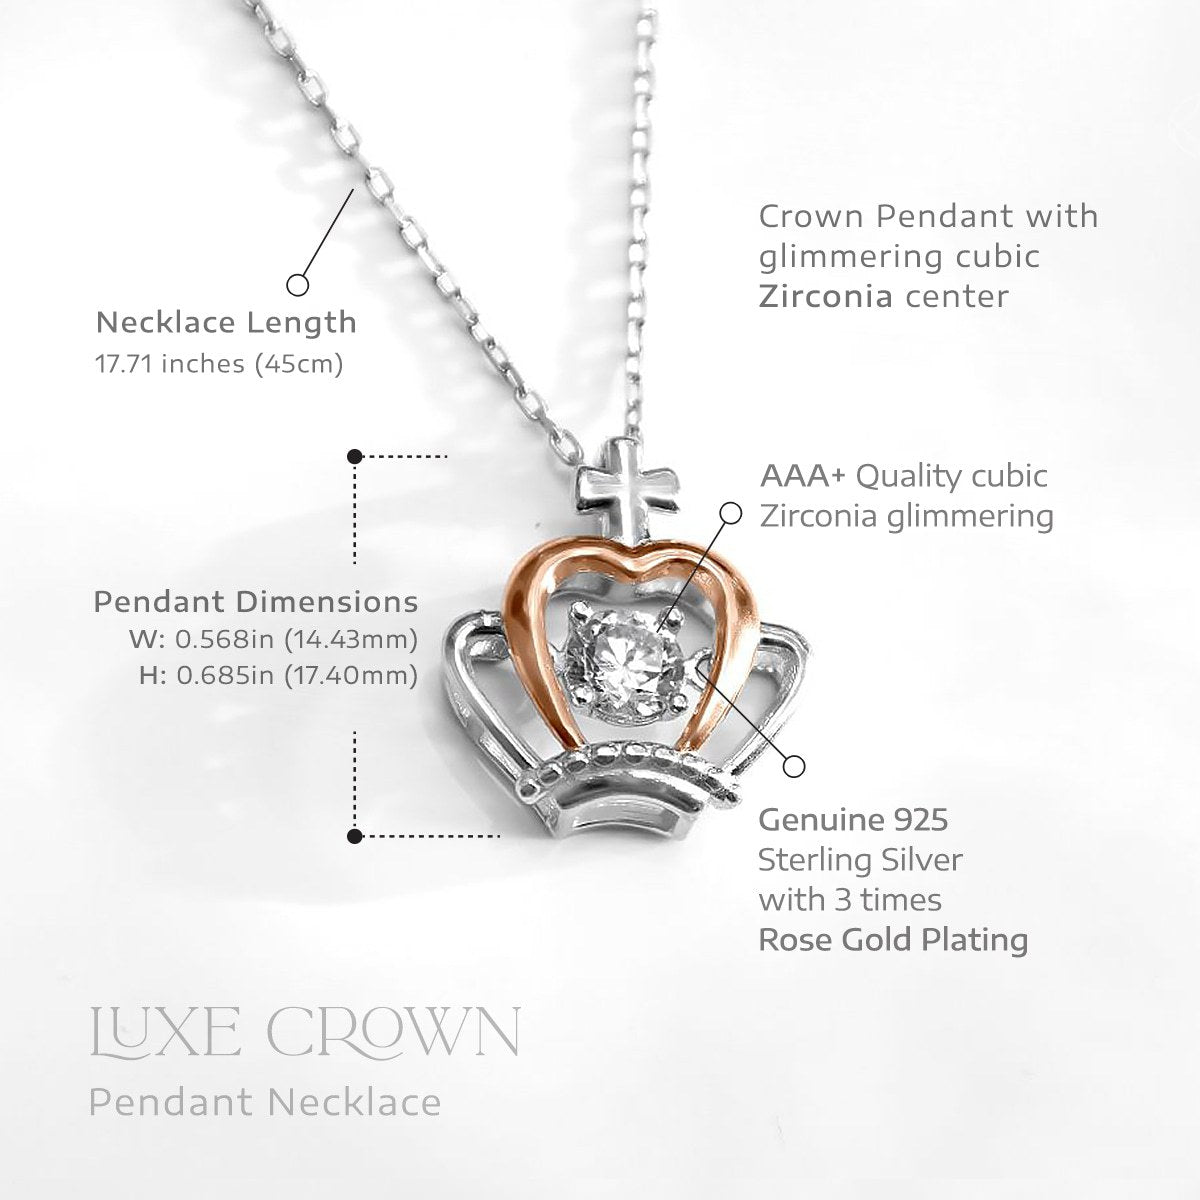 Luxe Crown Pendant Necklace